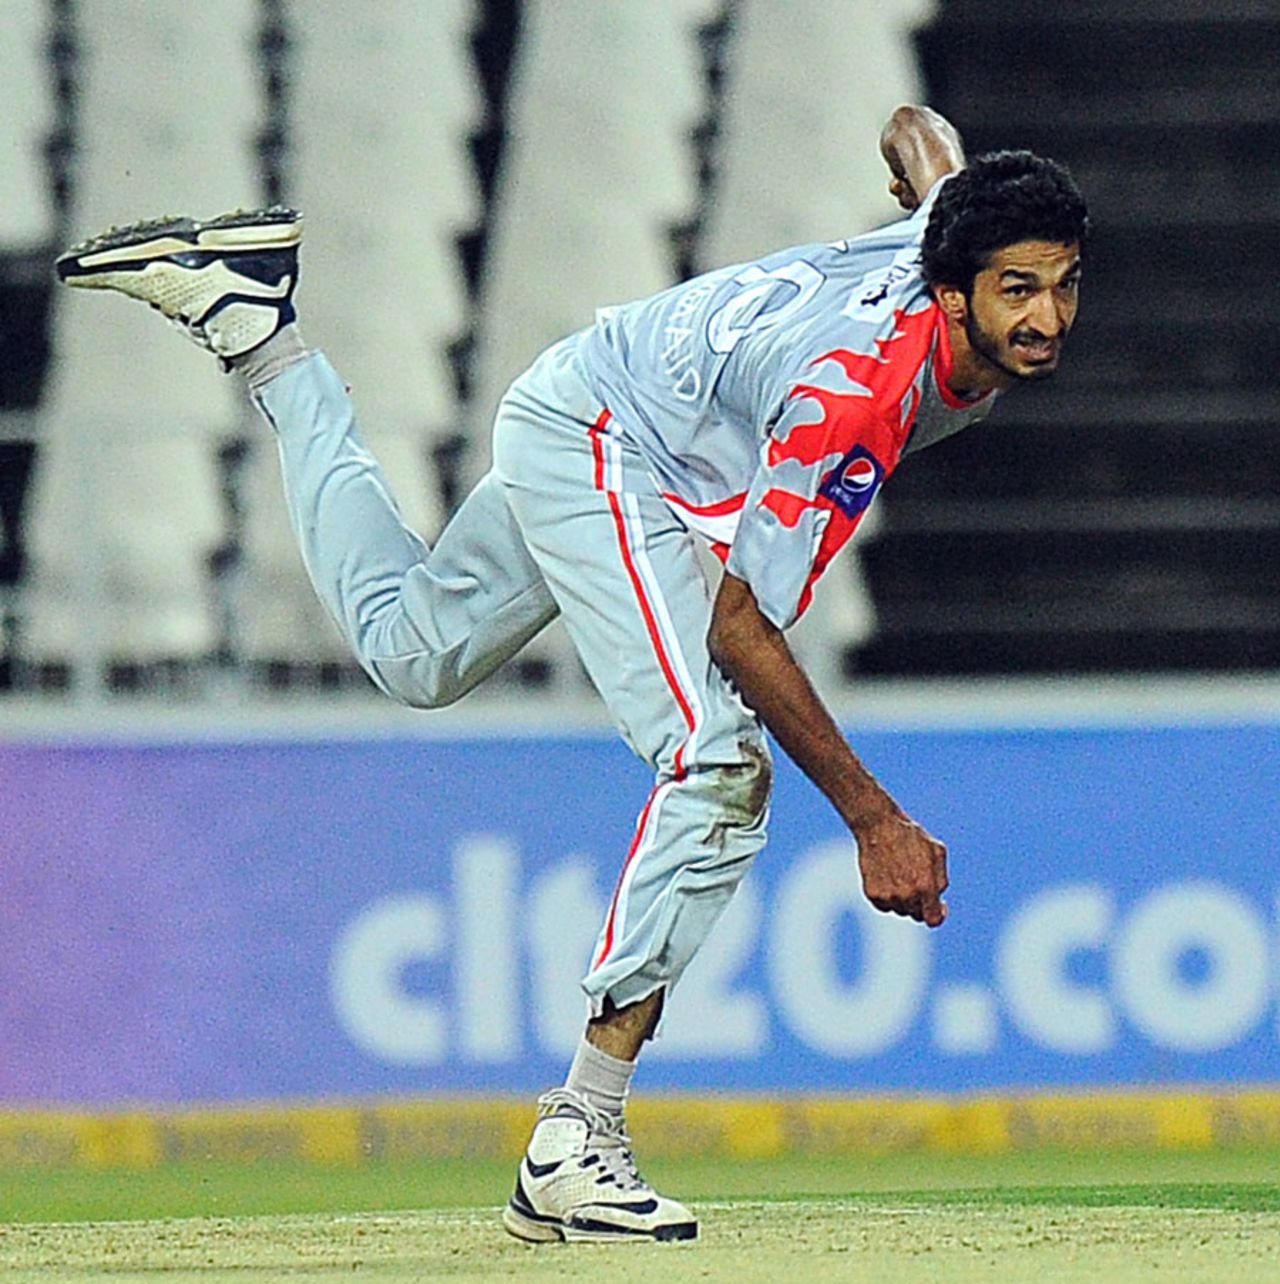 Sialkot's Umaid Asif delivers the ball, Hampshire v Sialkot Stallions, Champions League T20, Johannesburg, October 11, 2012